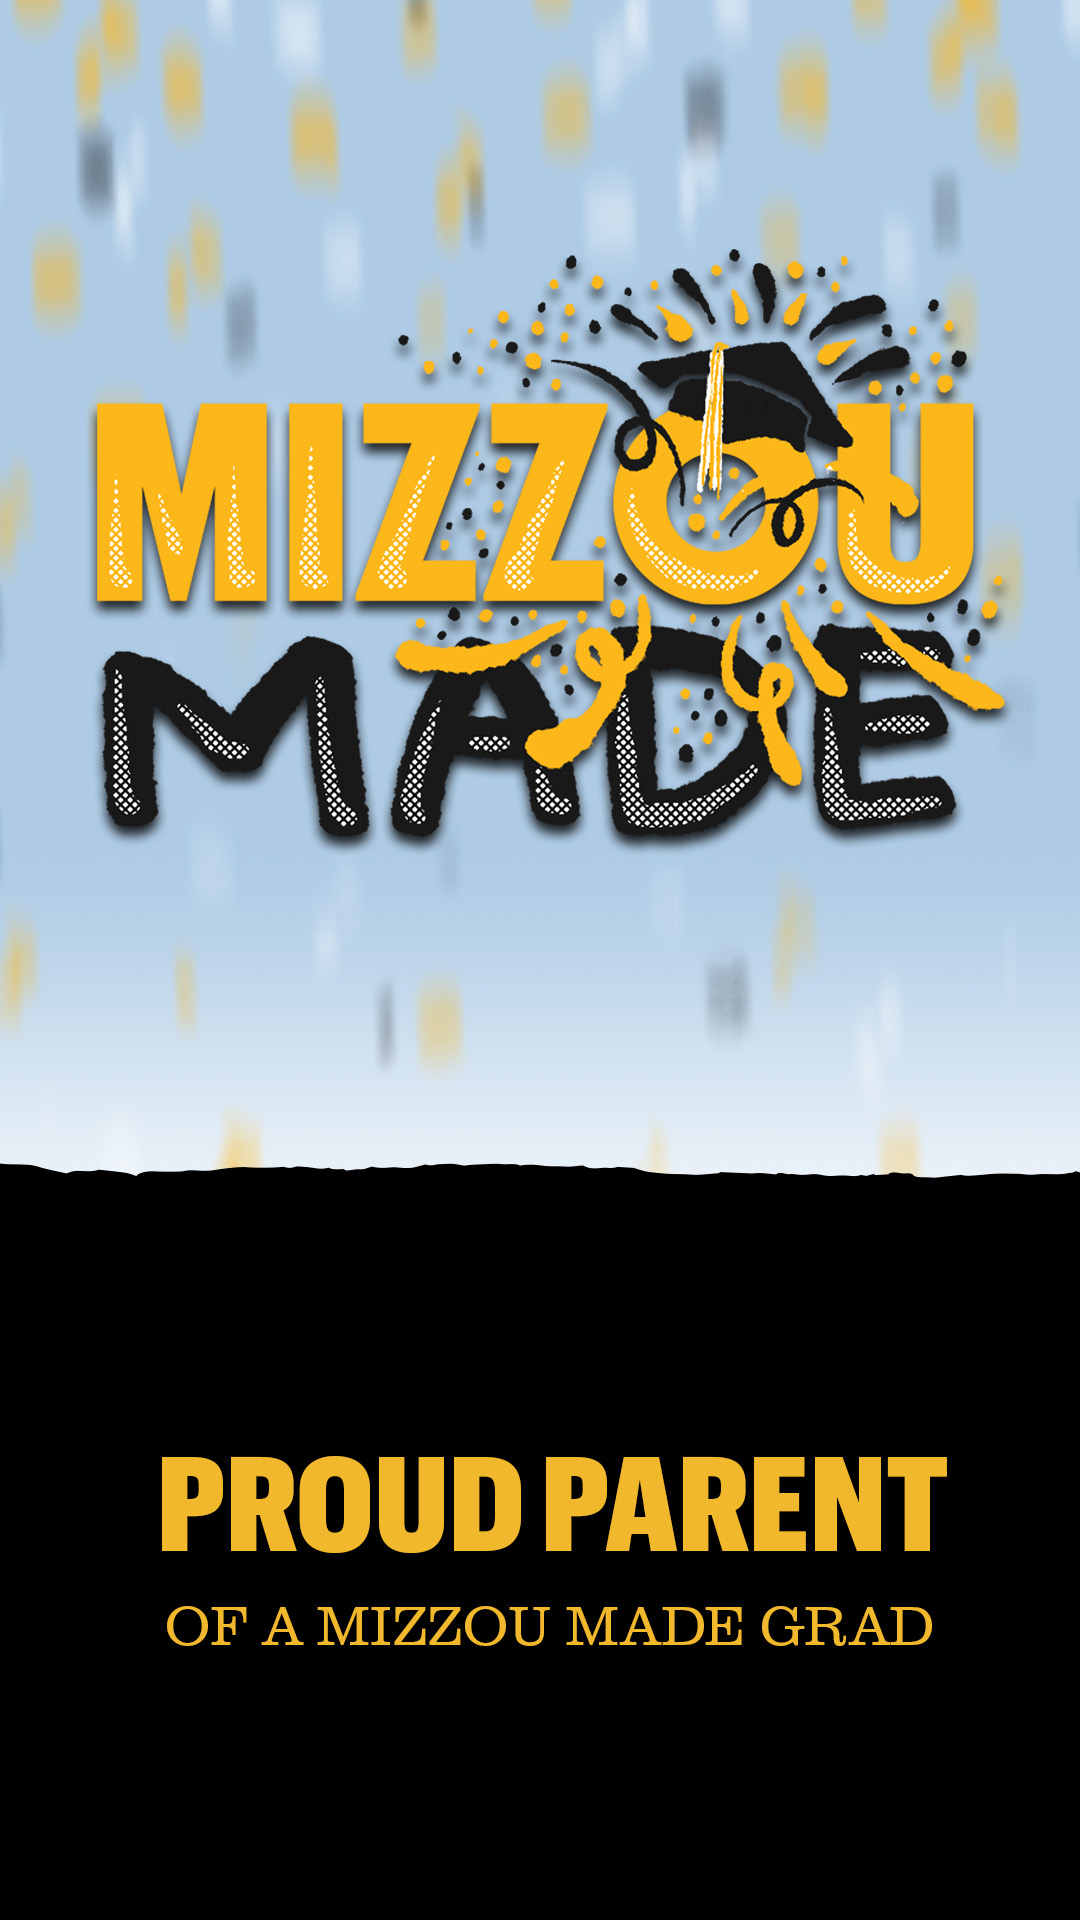 Light blue confetti background with a hand drawn gold bubble “Mizzou” and black “Made” stacked underneath it. The 'o' in the Mizzou has a graduation cap with confetti shooting out. The bottom half looks like a ripped black page with gold text that says 